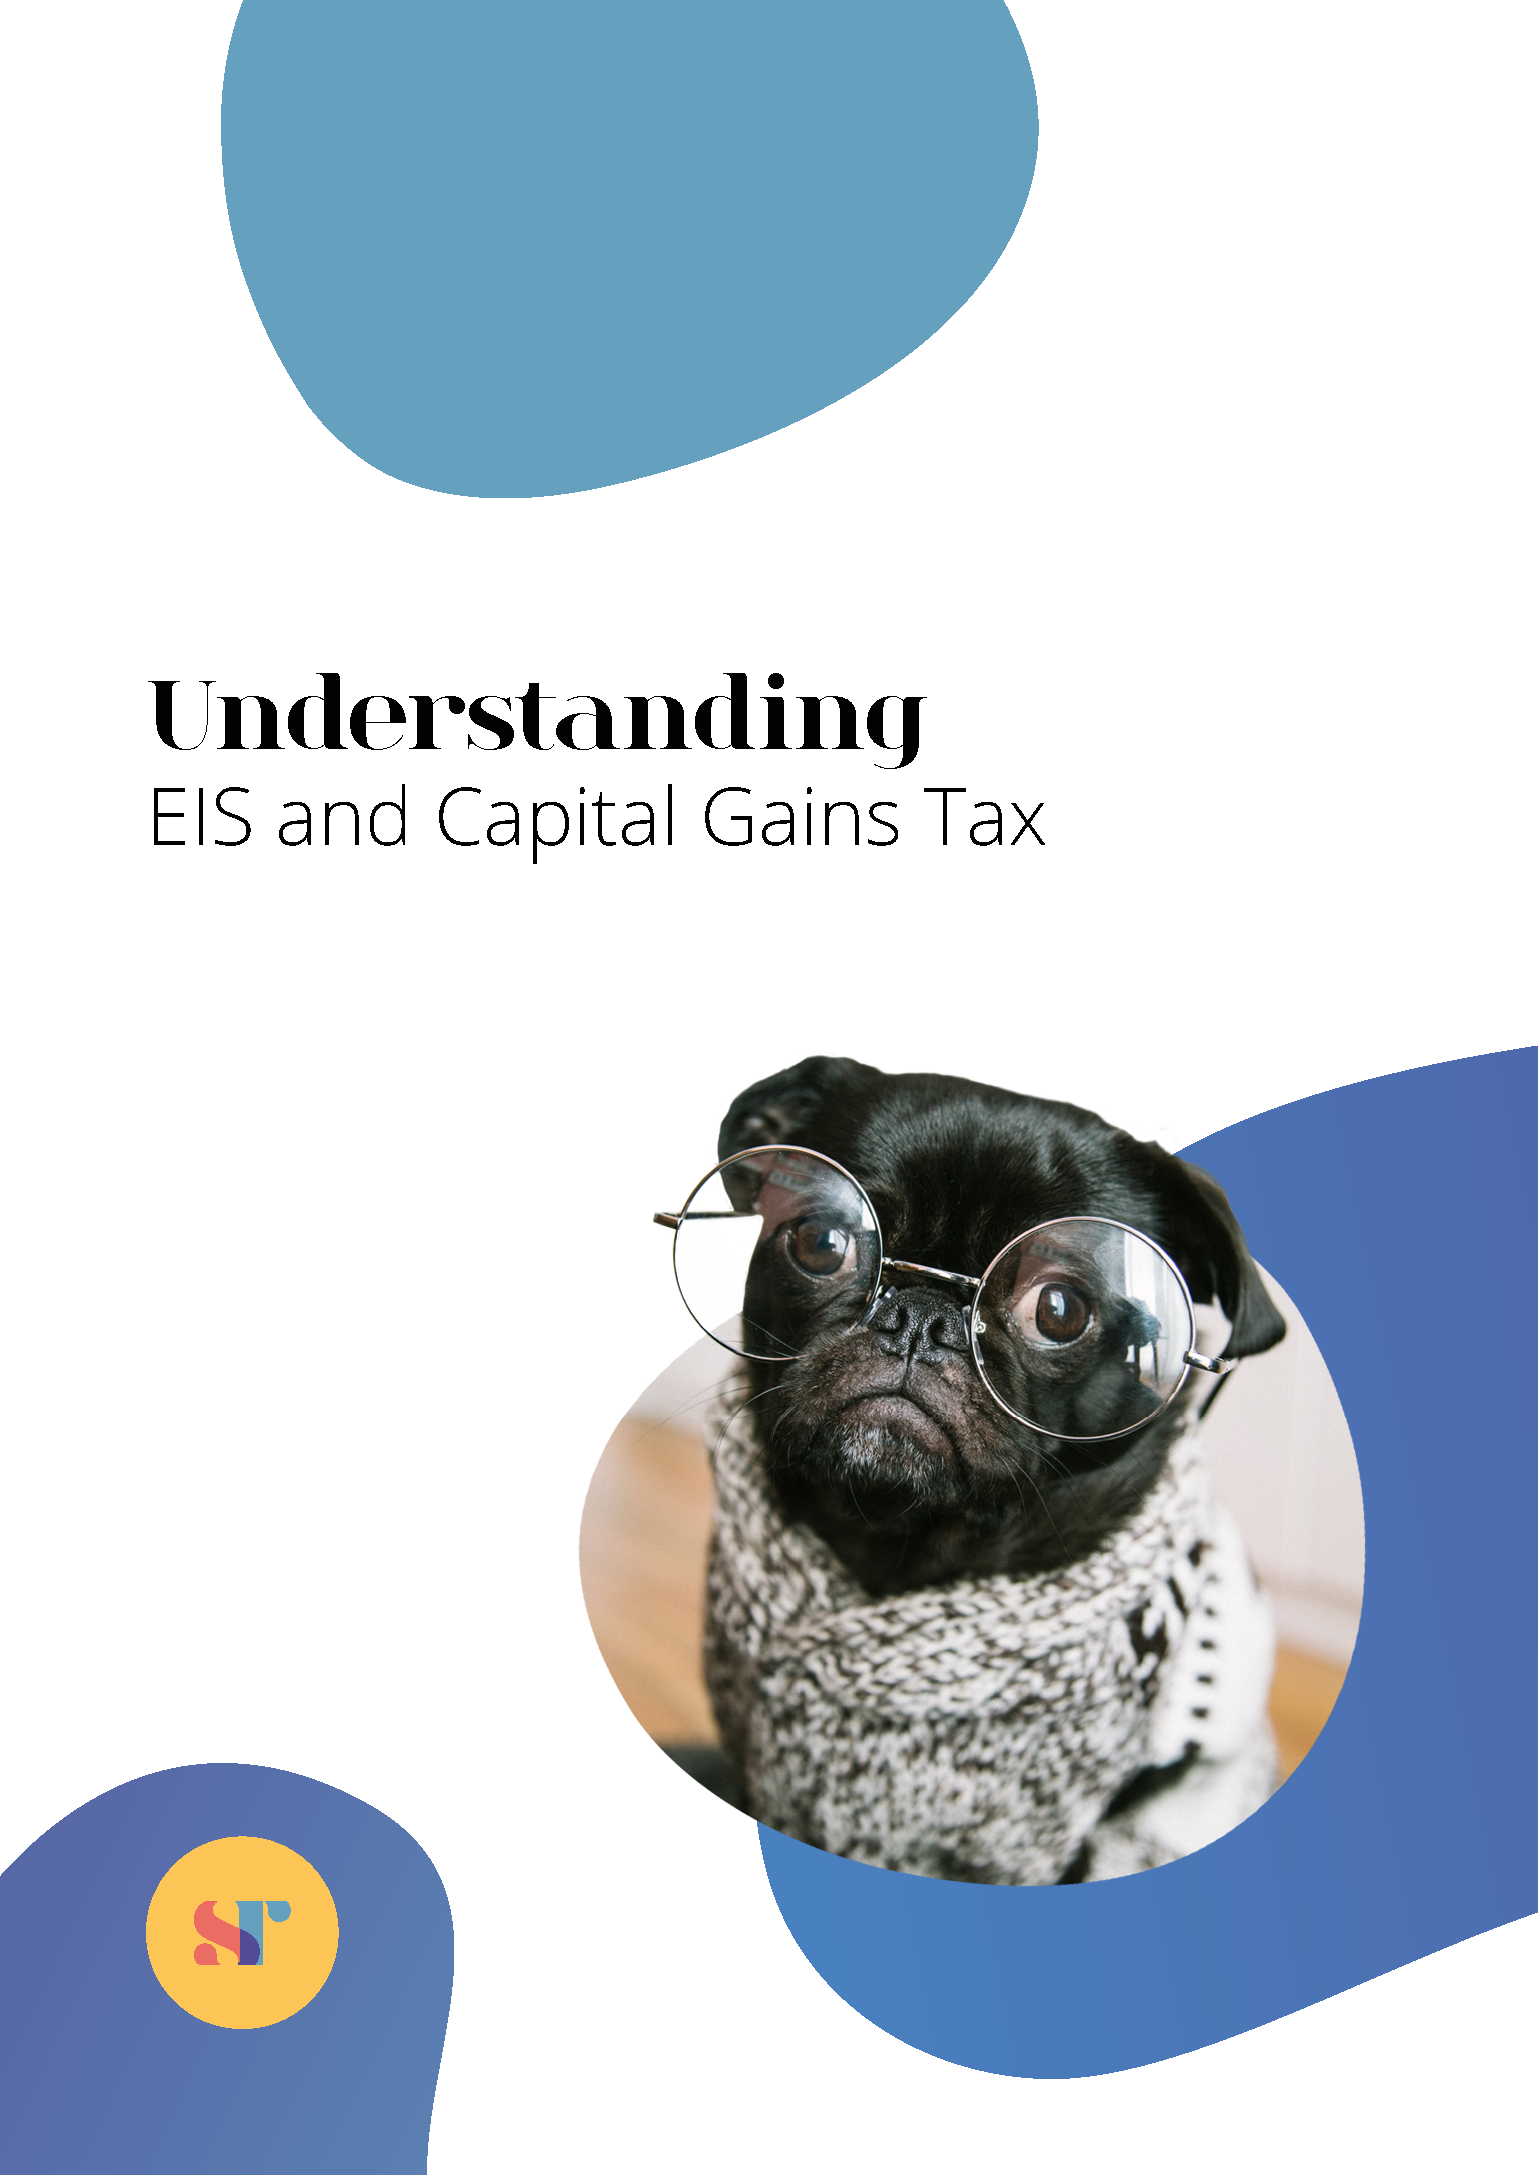 Capital gains and EIS guide